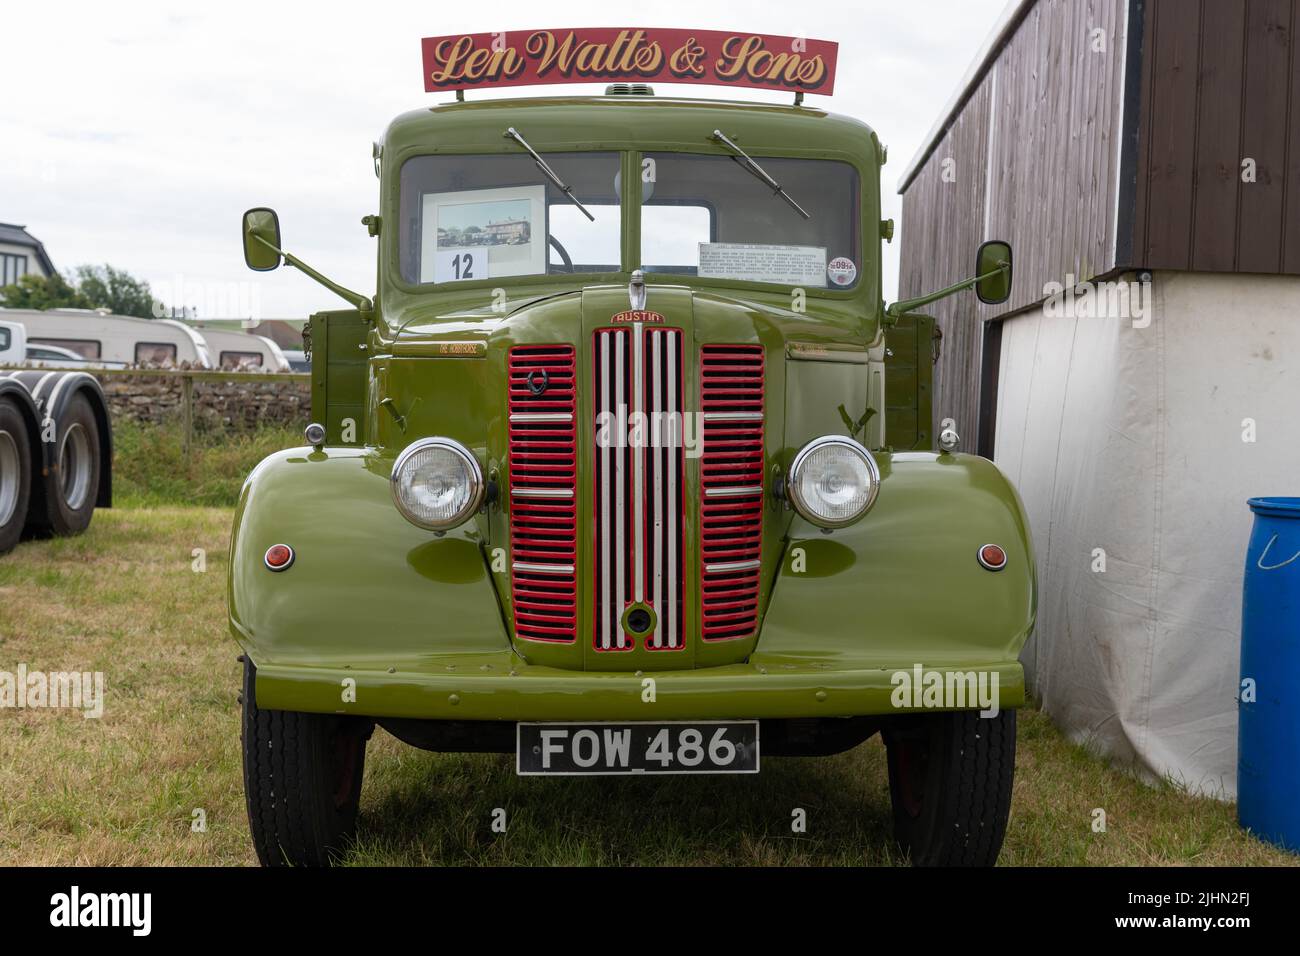 West Bay.Dorset.United Kingdom.June 12th 2022.A restored 1947 Austin K4 truck formerly used by the Eldridge Pope brewery is on display at the West bay Stock Photo